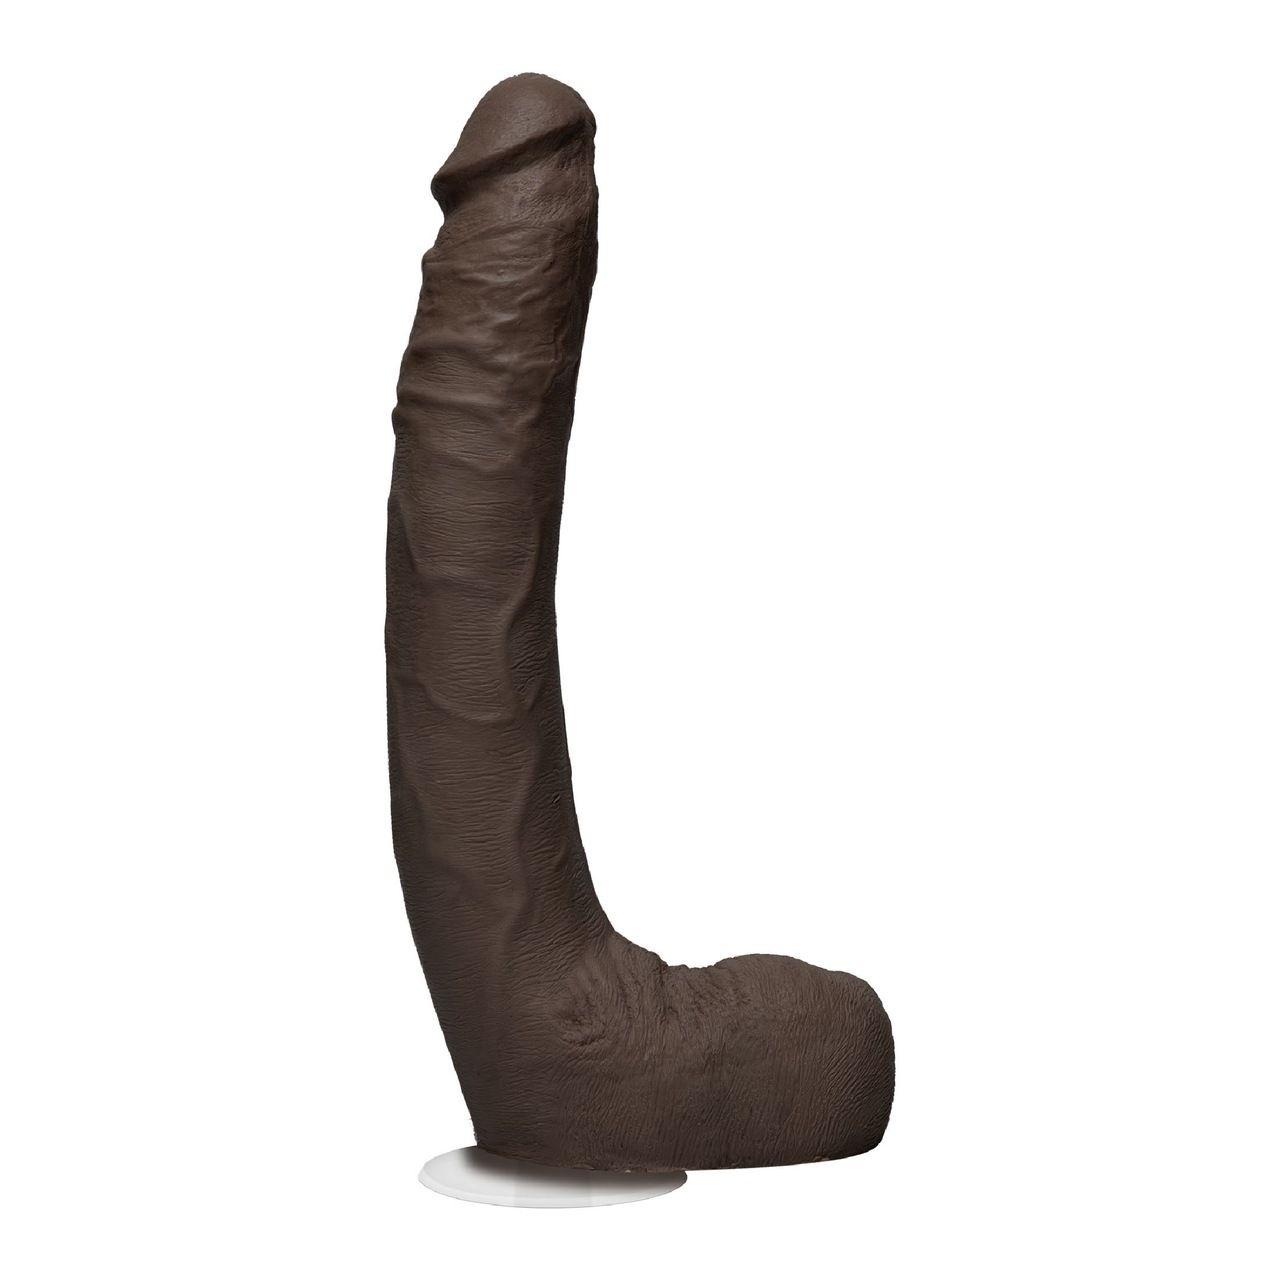 Scuttlebutt recomended inch amazing new dildo cock